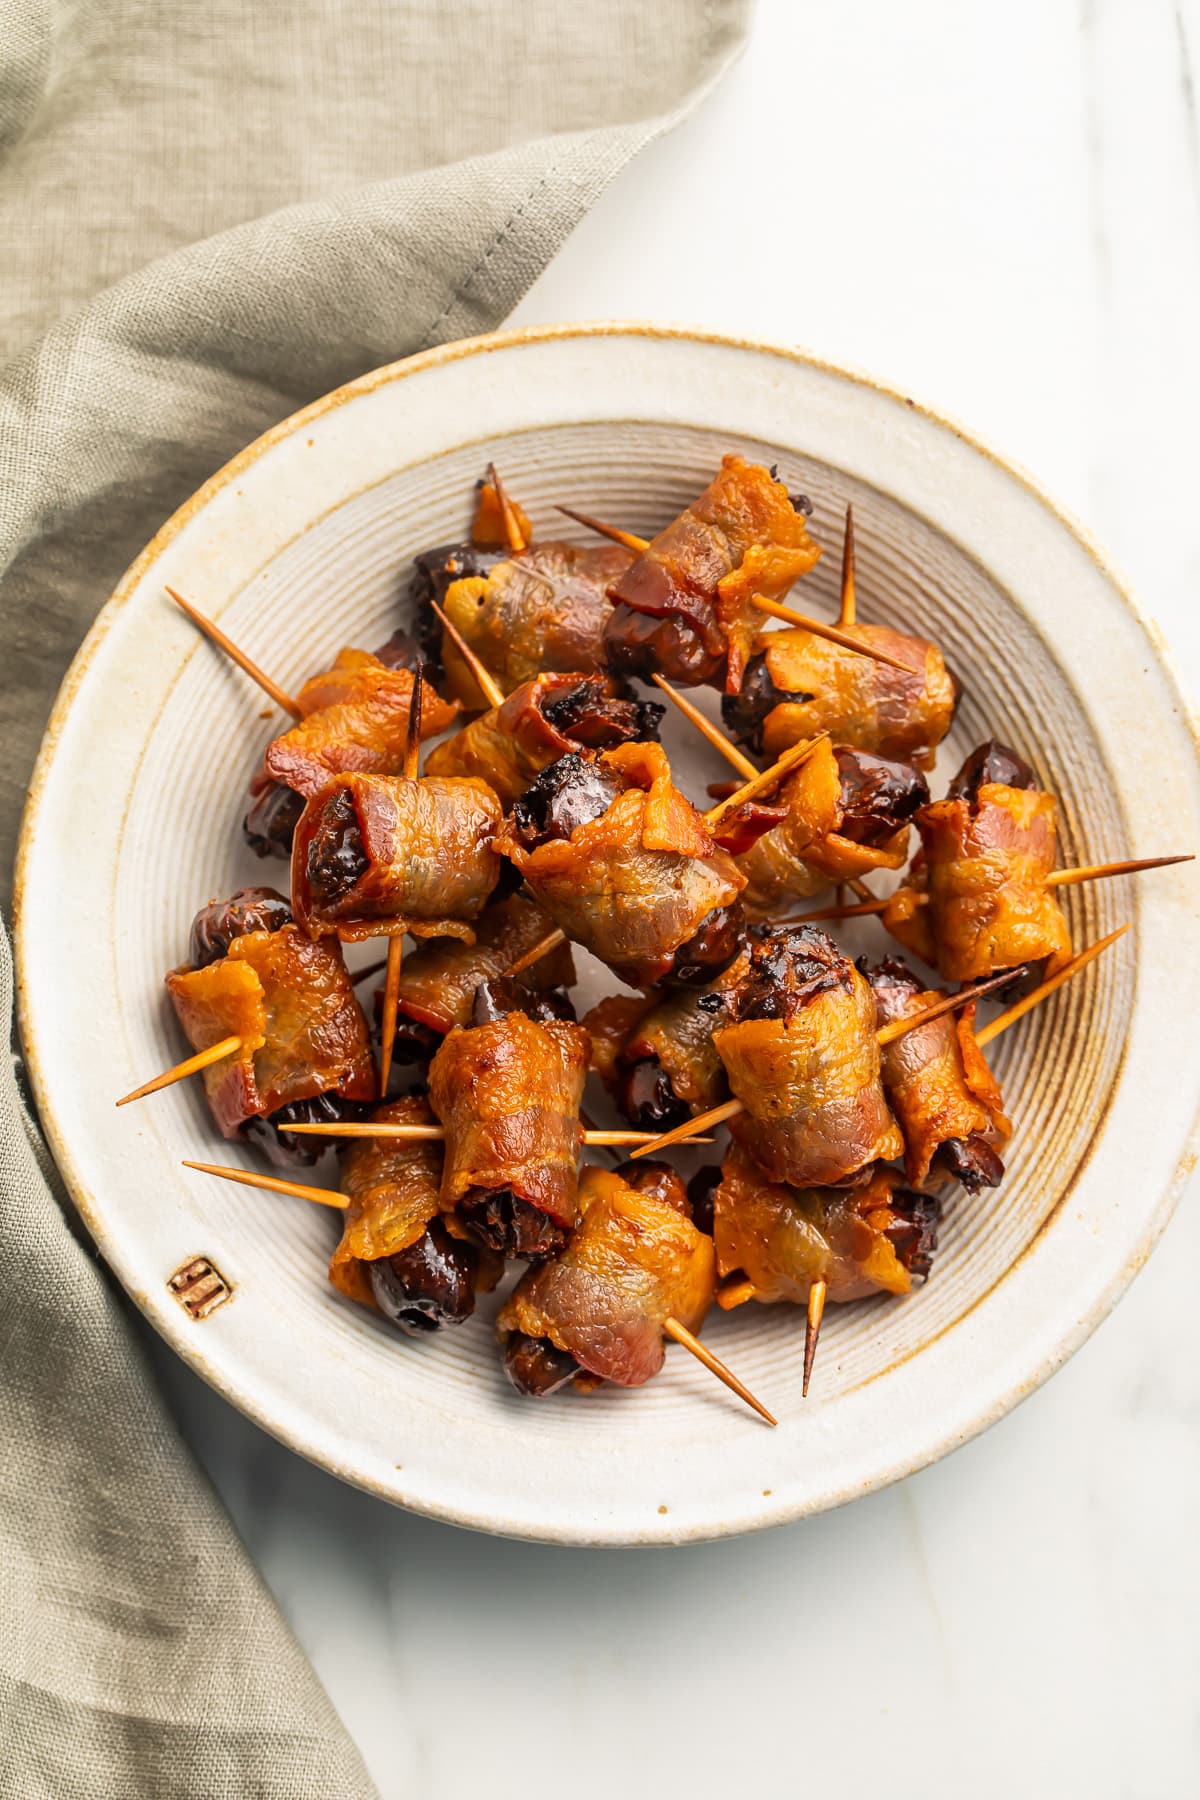 Several bacon-wrapped dates piled in a large vintage-looking bowl next to a cloth napkin.